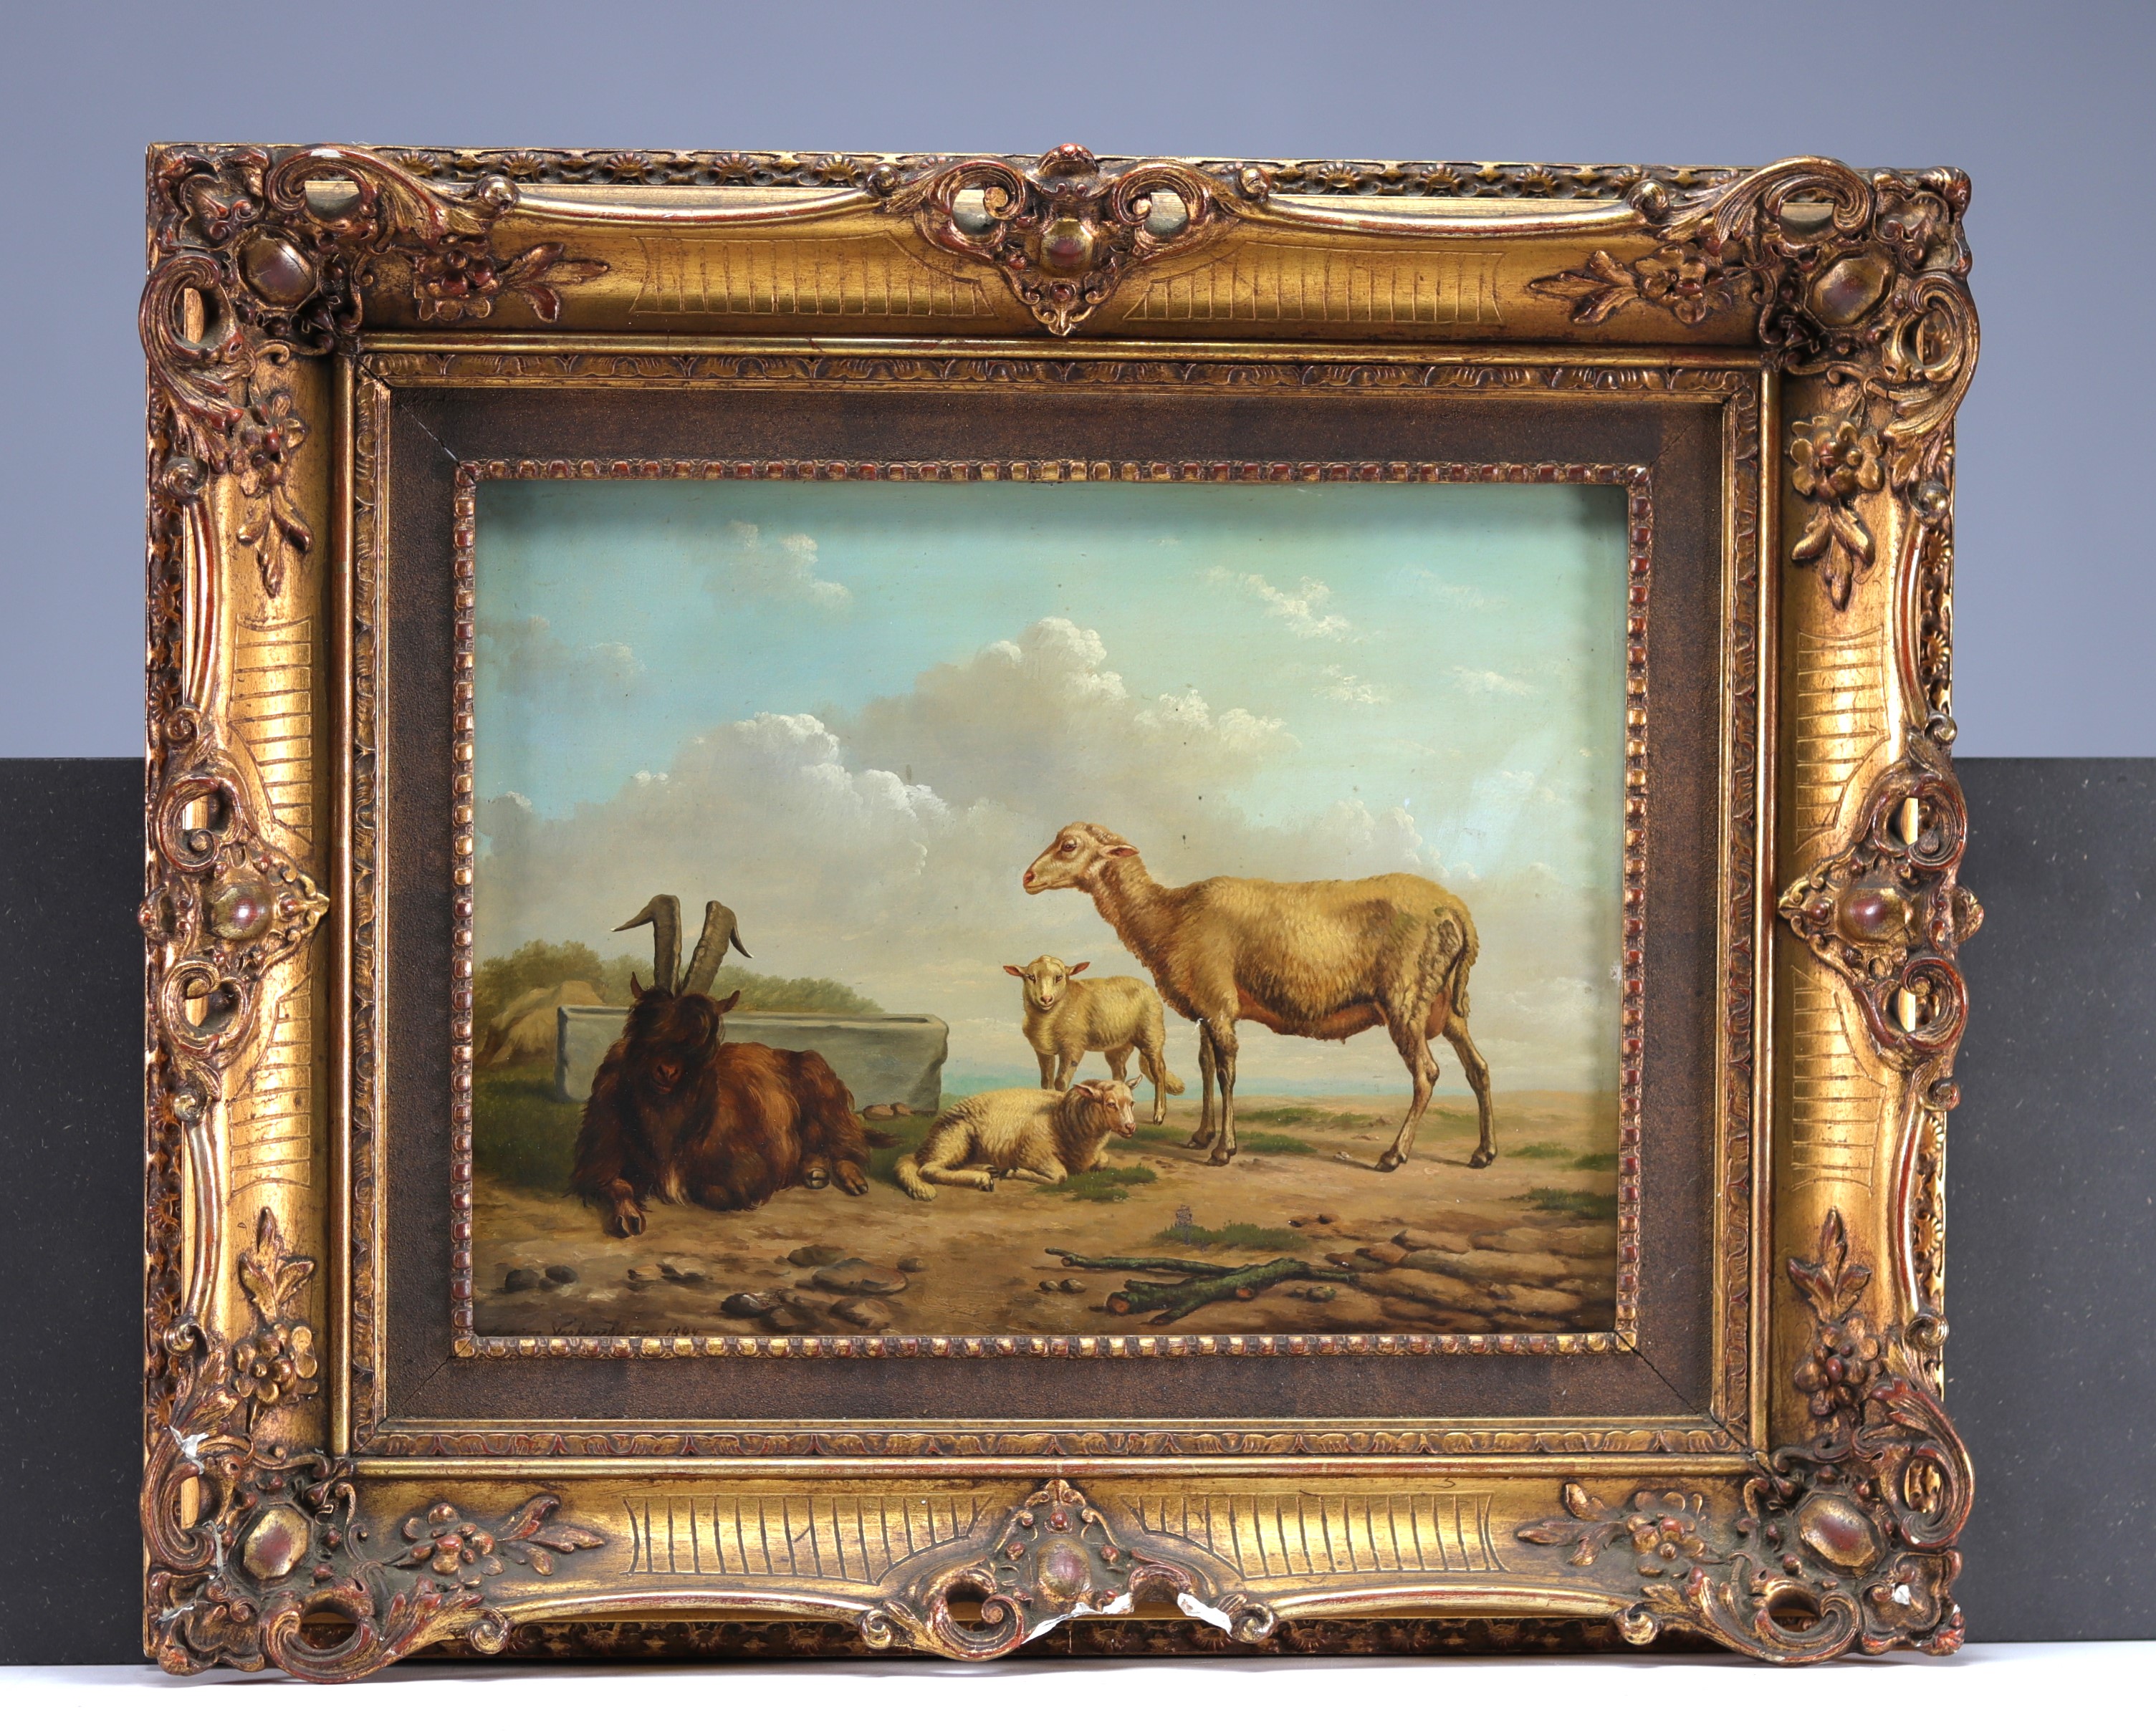 Eugene VERBOECKHOVEN (1798/99-1881) "Sheep and goats" Oil on panel. - Image 2 of 3